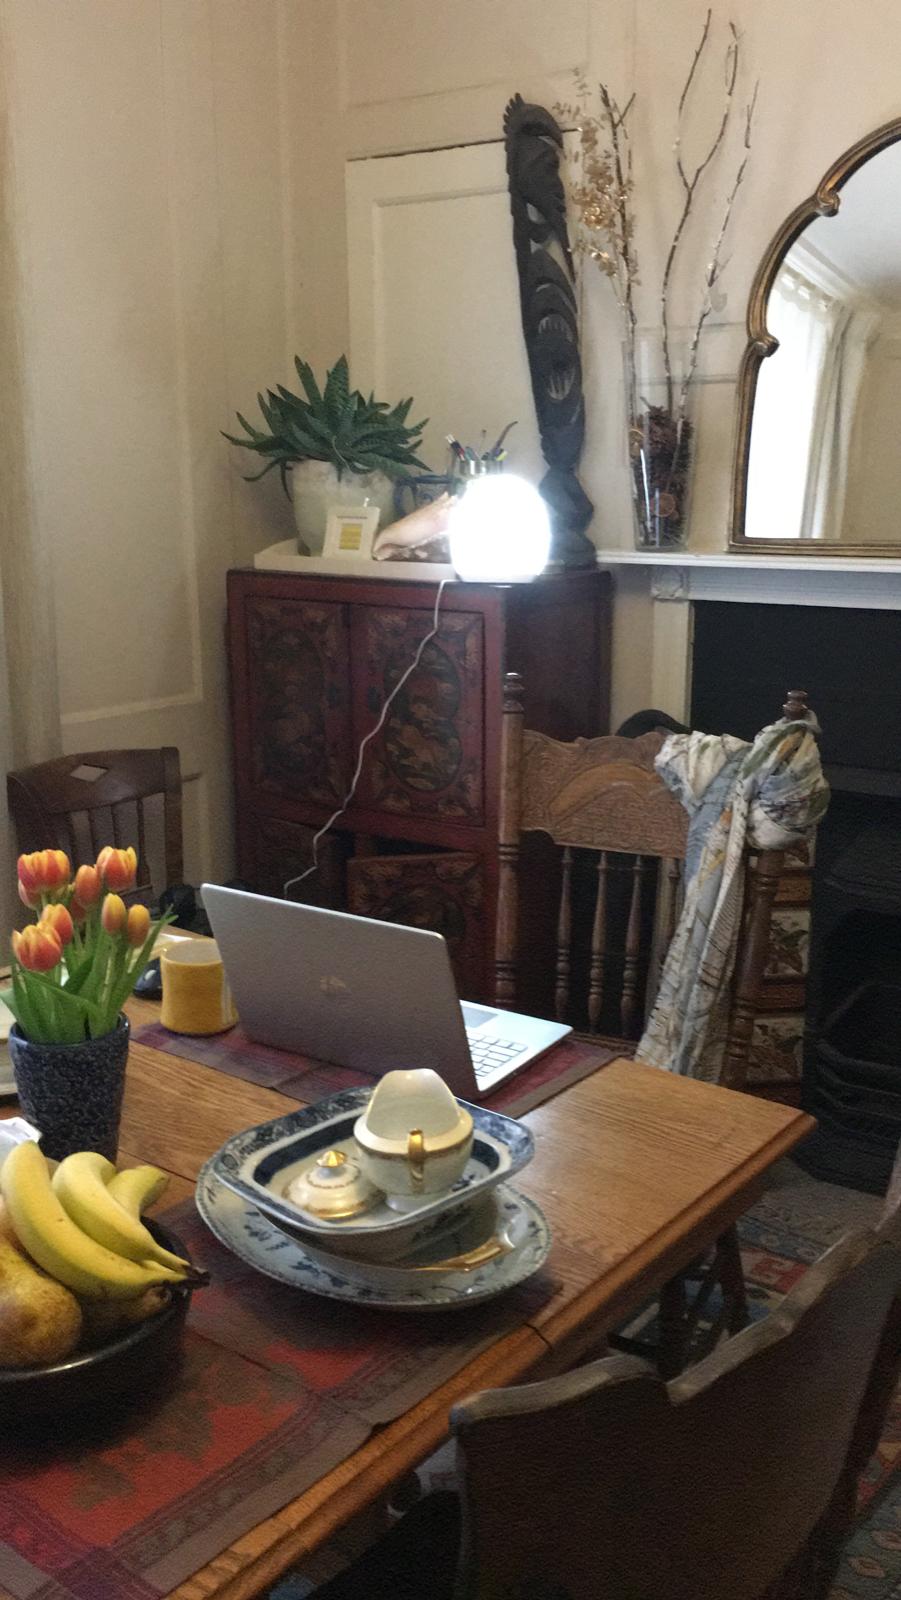 Living in UK makes SAD lights useful for many who prefer sunny days. Current models have built in timers useful for keeping  track of your morning light dose, cool kelvin color temperature for morning and warmer settings for evenings.